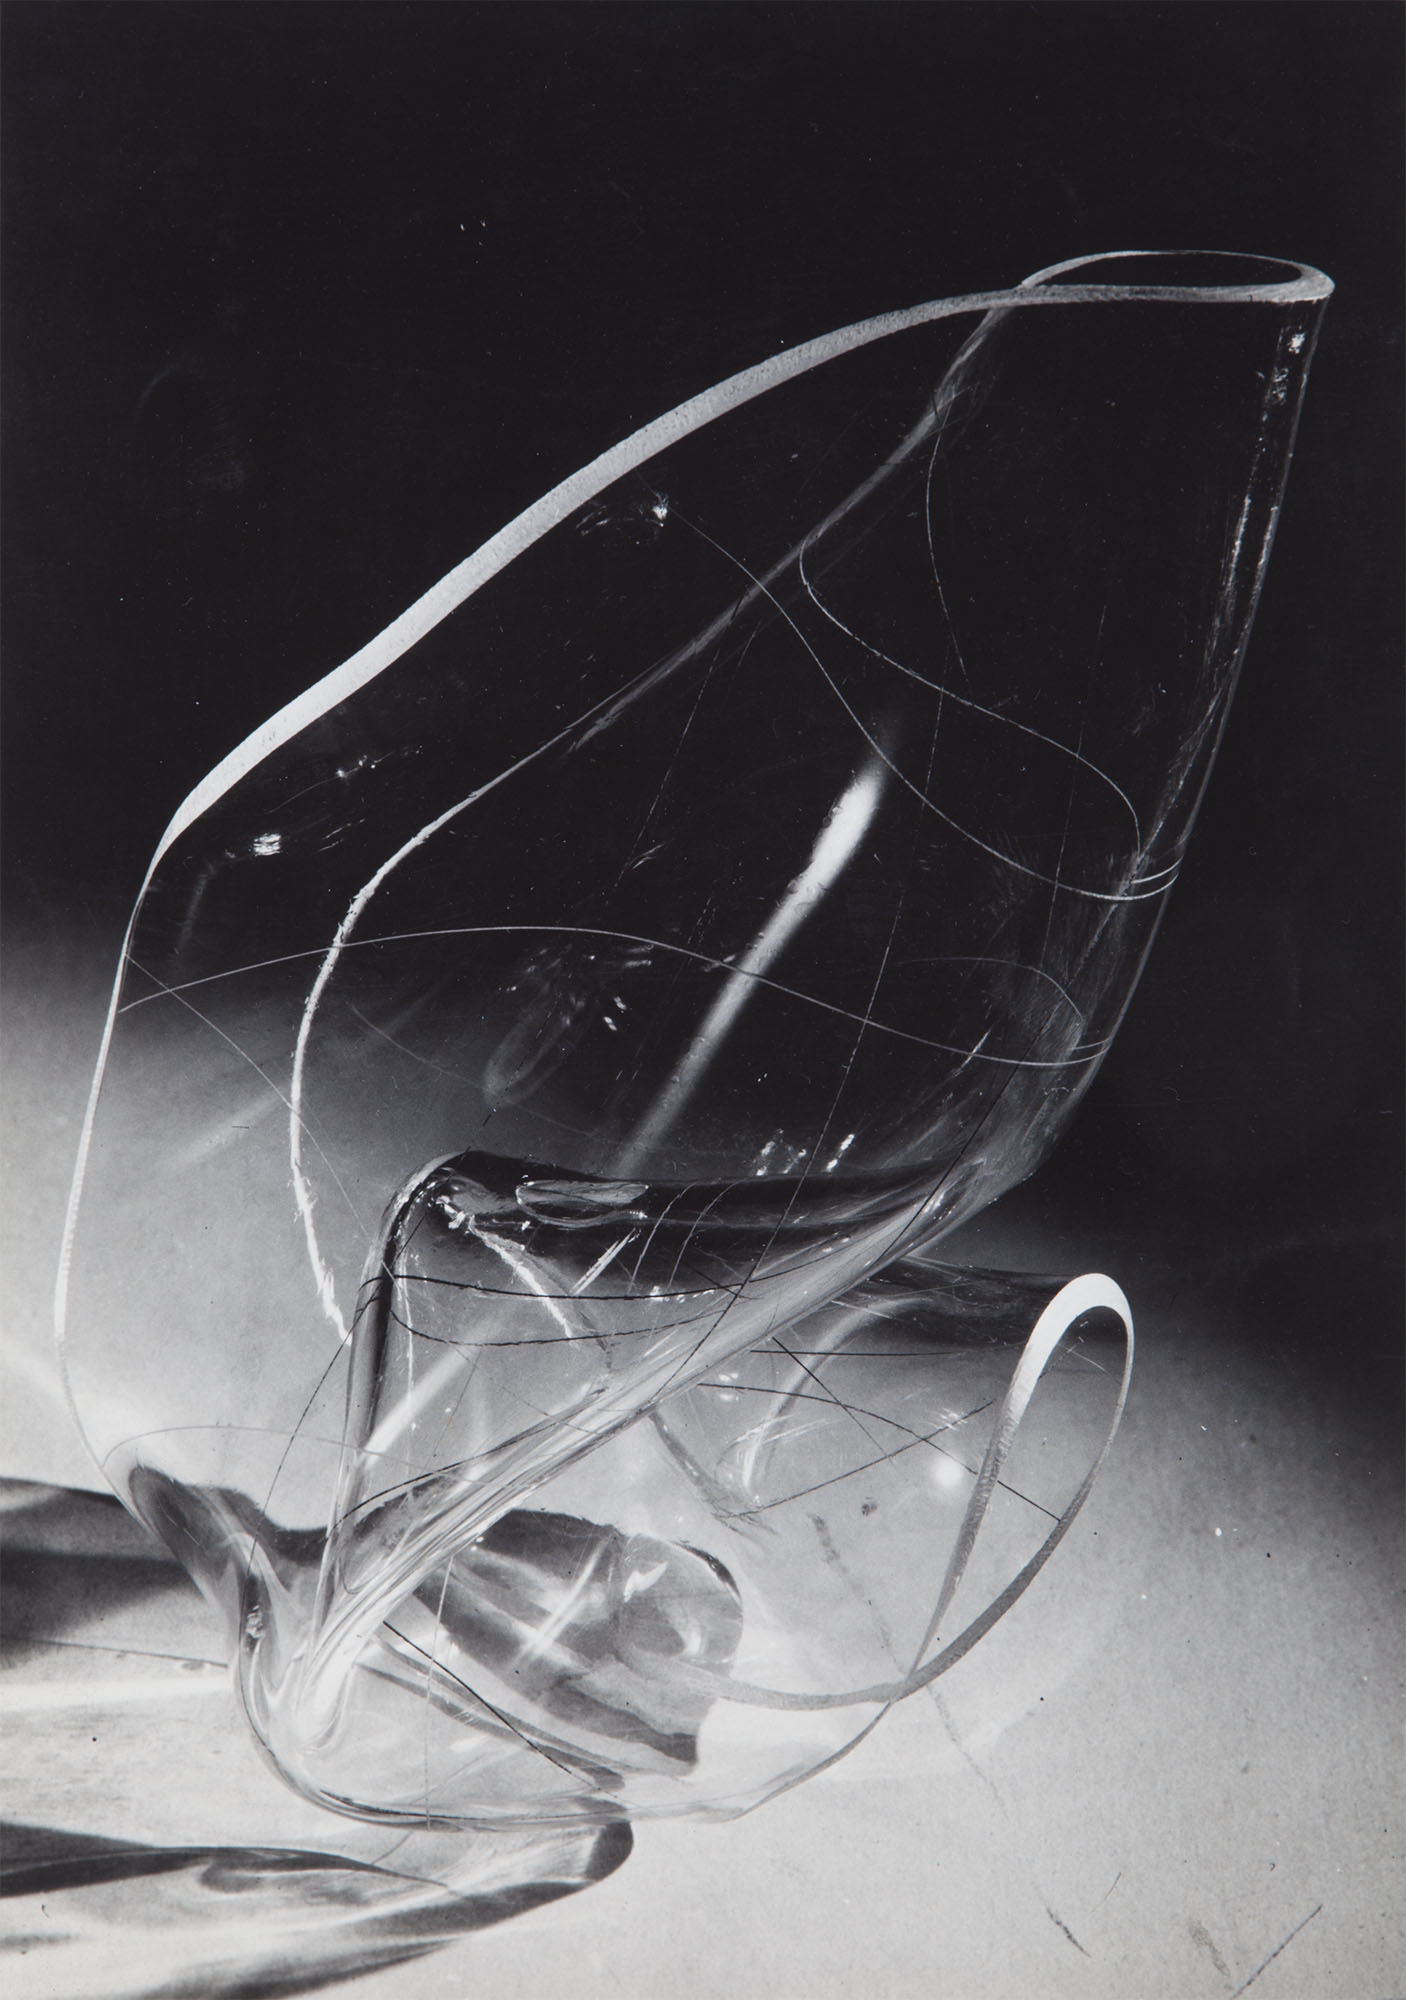 Laszlo Moholy-Nagy, Convex-Concave, 1940. Silver gelatin print. Collection of DePaul Art Museum, 2004.45